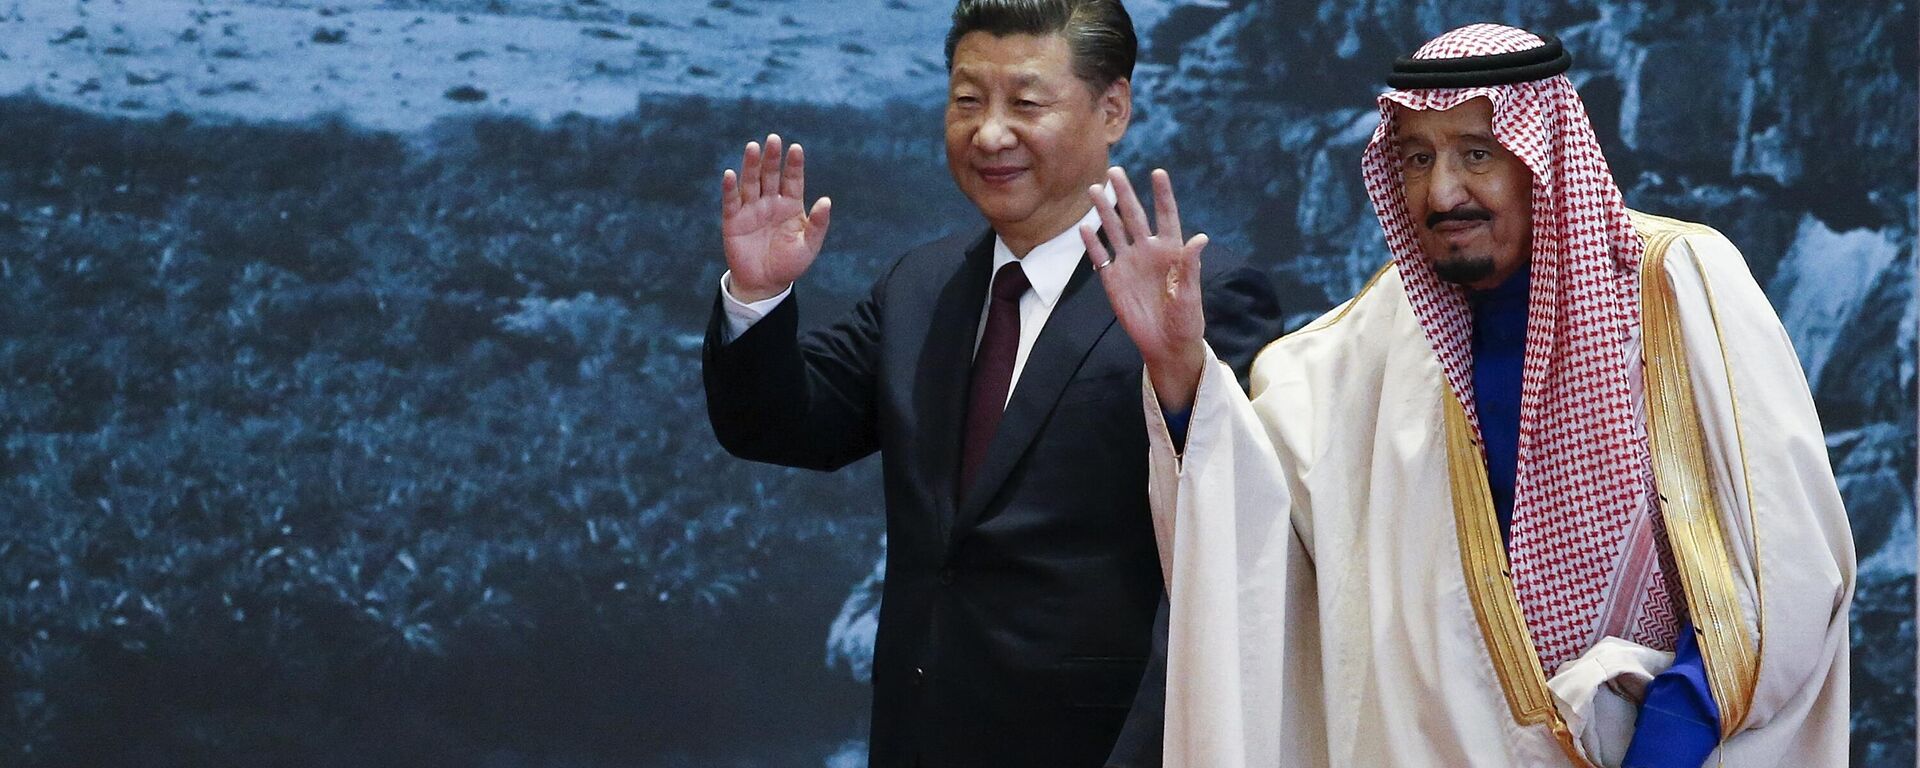 In this file photo taken on March 16, 2017 China's President Xi Jinping (L) and Saudi King Salman bin Abdulaziz (R) attend the Road to the Arab Republic - the closing ceremony for artifacts unearthed in Saudi Arabia, at China National Museum in Beijing - Sputnik International, 1920, 07.12.2022